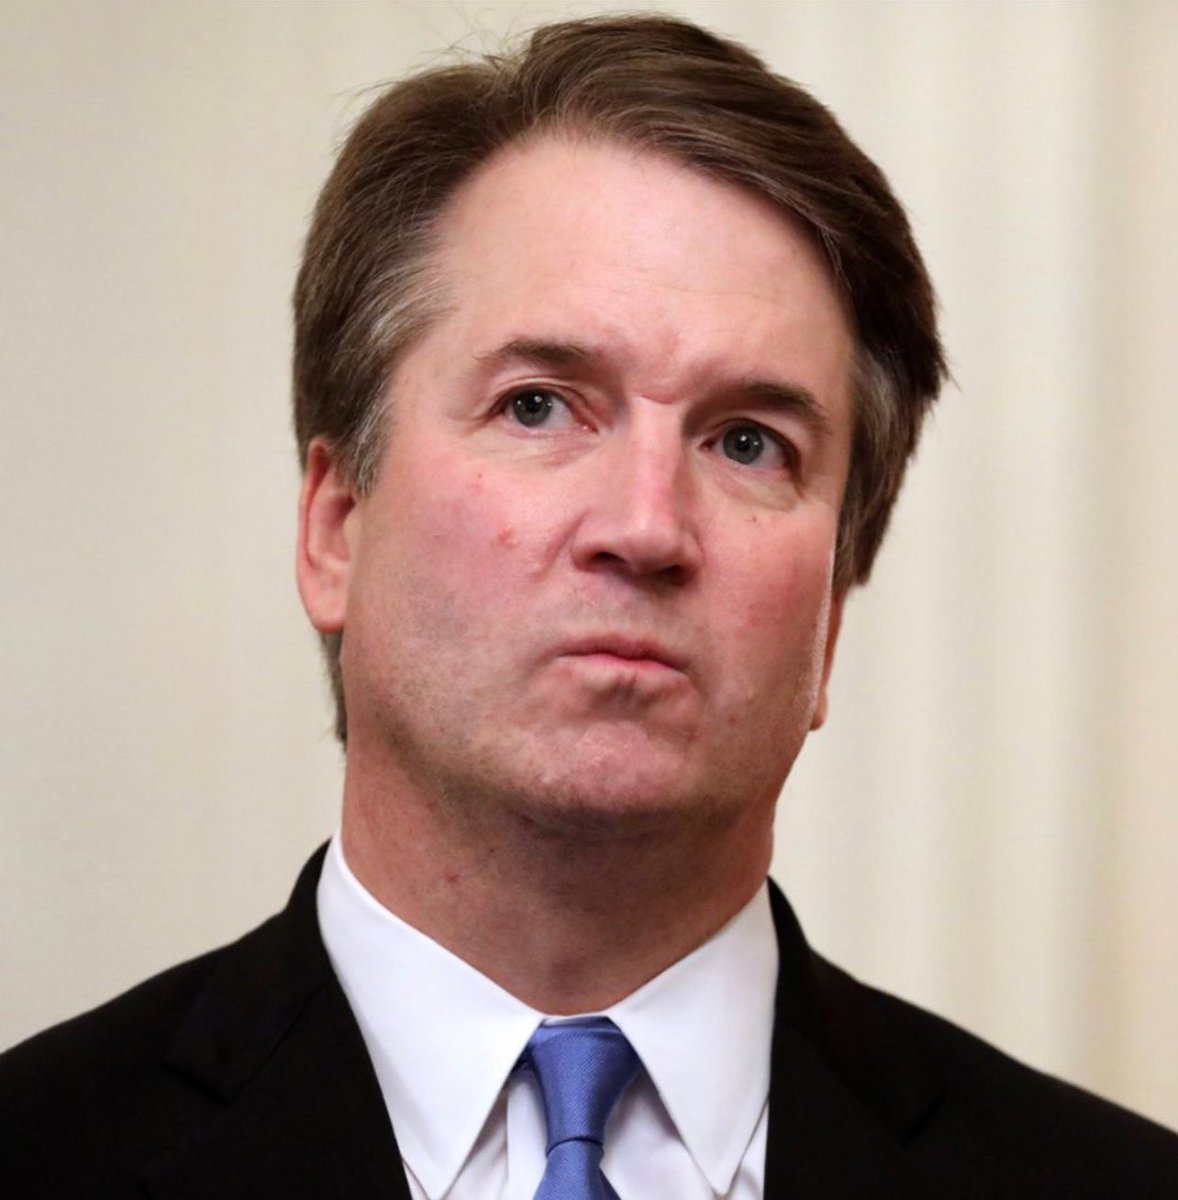 Hey Brett Kavanaugh. Want to talk about affirmative action and student loans? Let’s examine how you got into Yale, shall we? During your Senate testimony, you said “I got into Yale Law School. That’s the No. 1 law school in the country. I had no connections there. I got